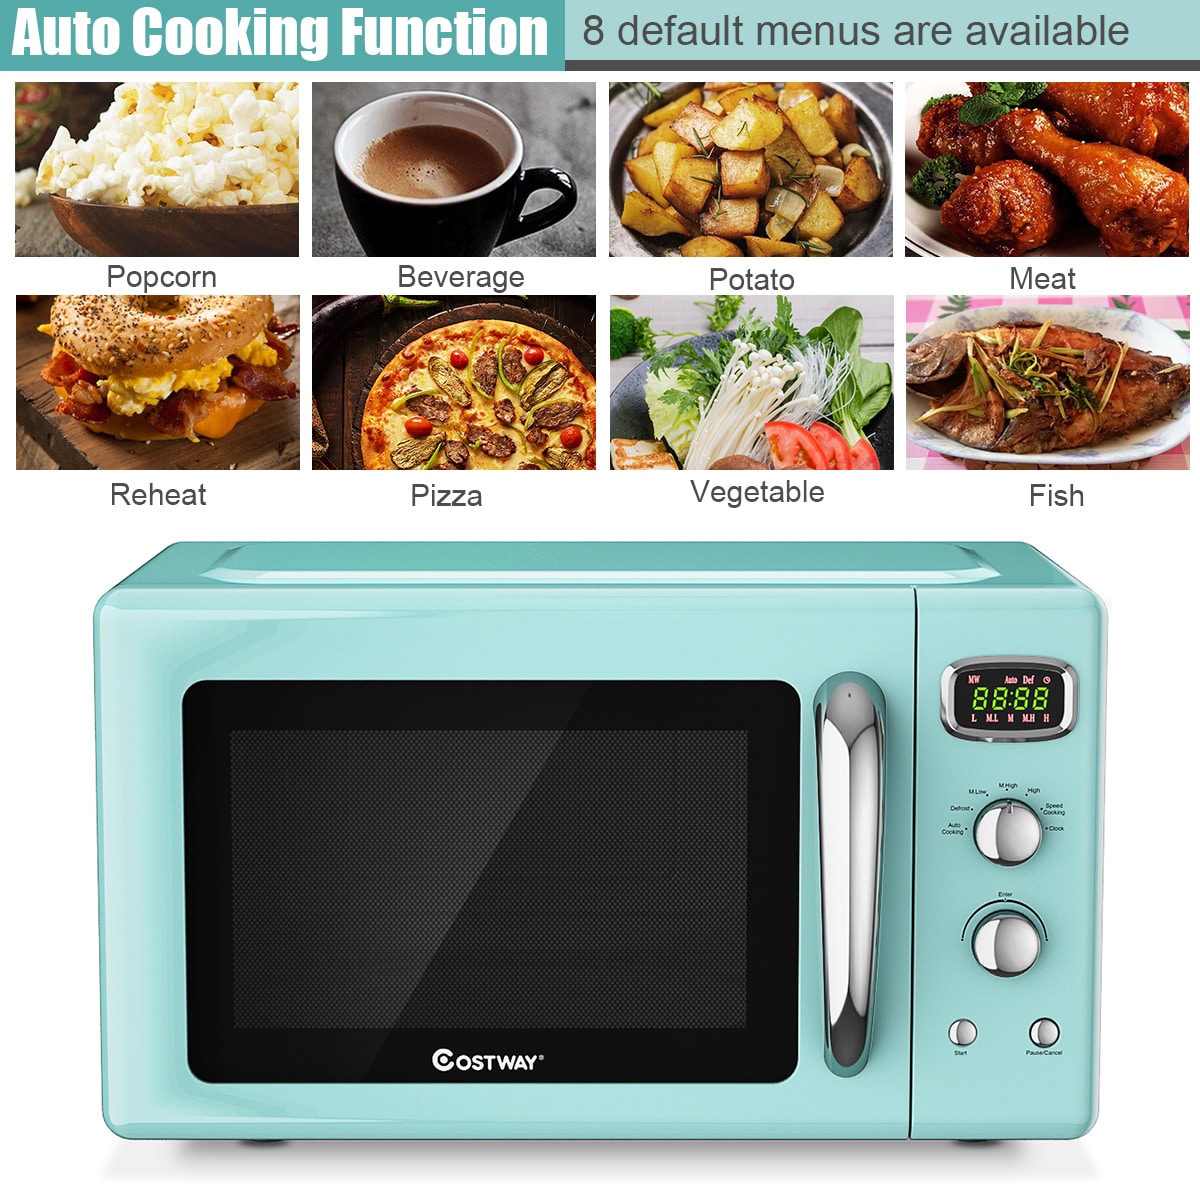 GCP Products GCP-65484539 Retro Small Microwave Oven With Compact Size, 9  Preset Menus, Position-Memory Turntable, Mute Function, Countertop Microwave  …